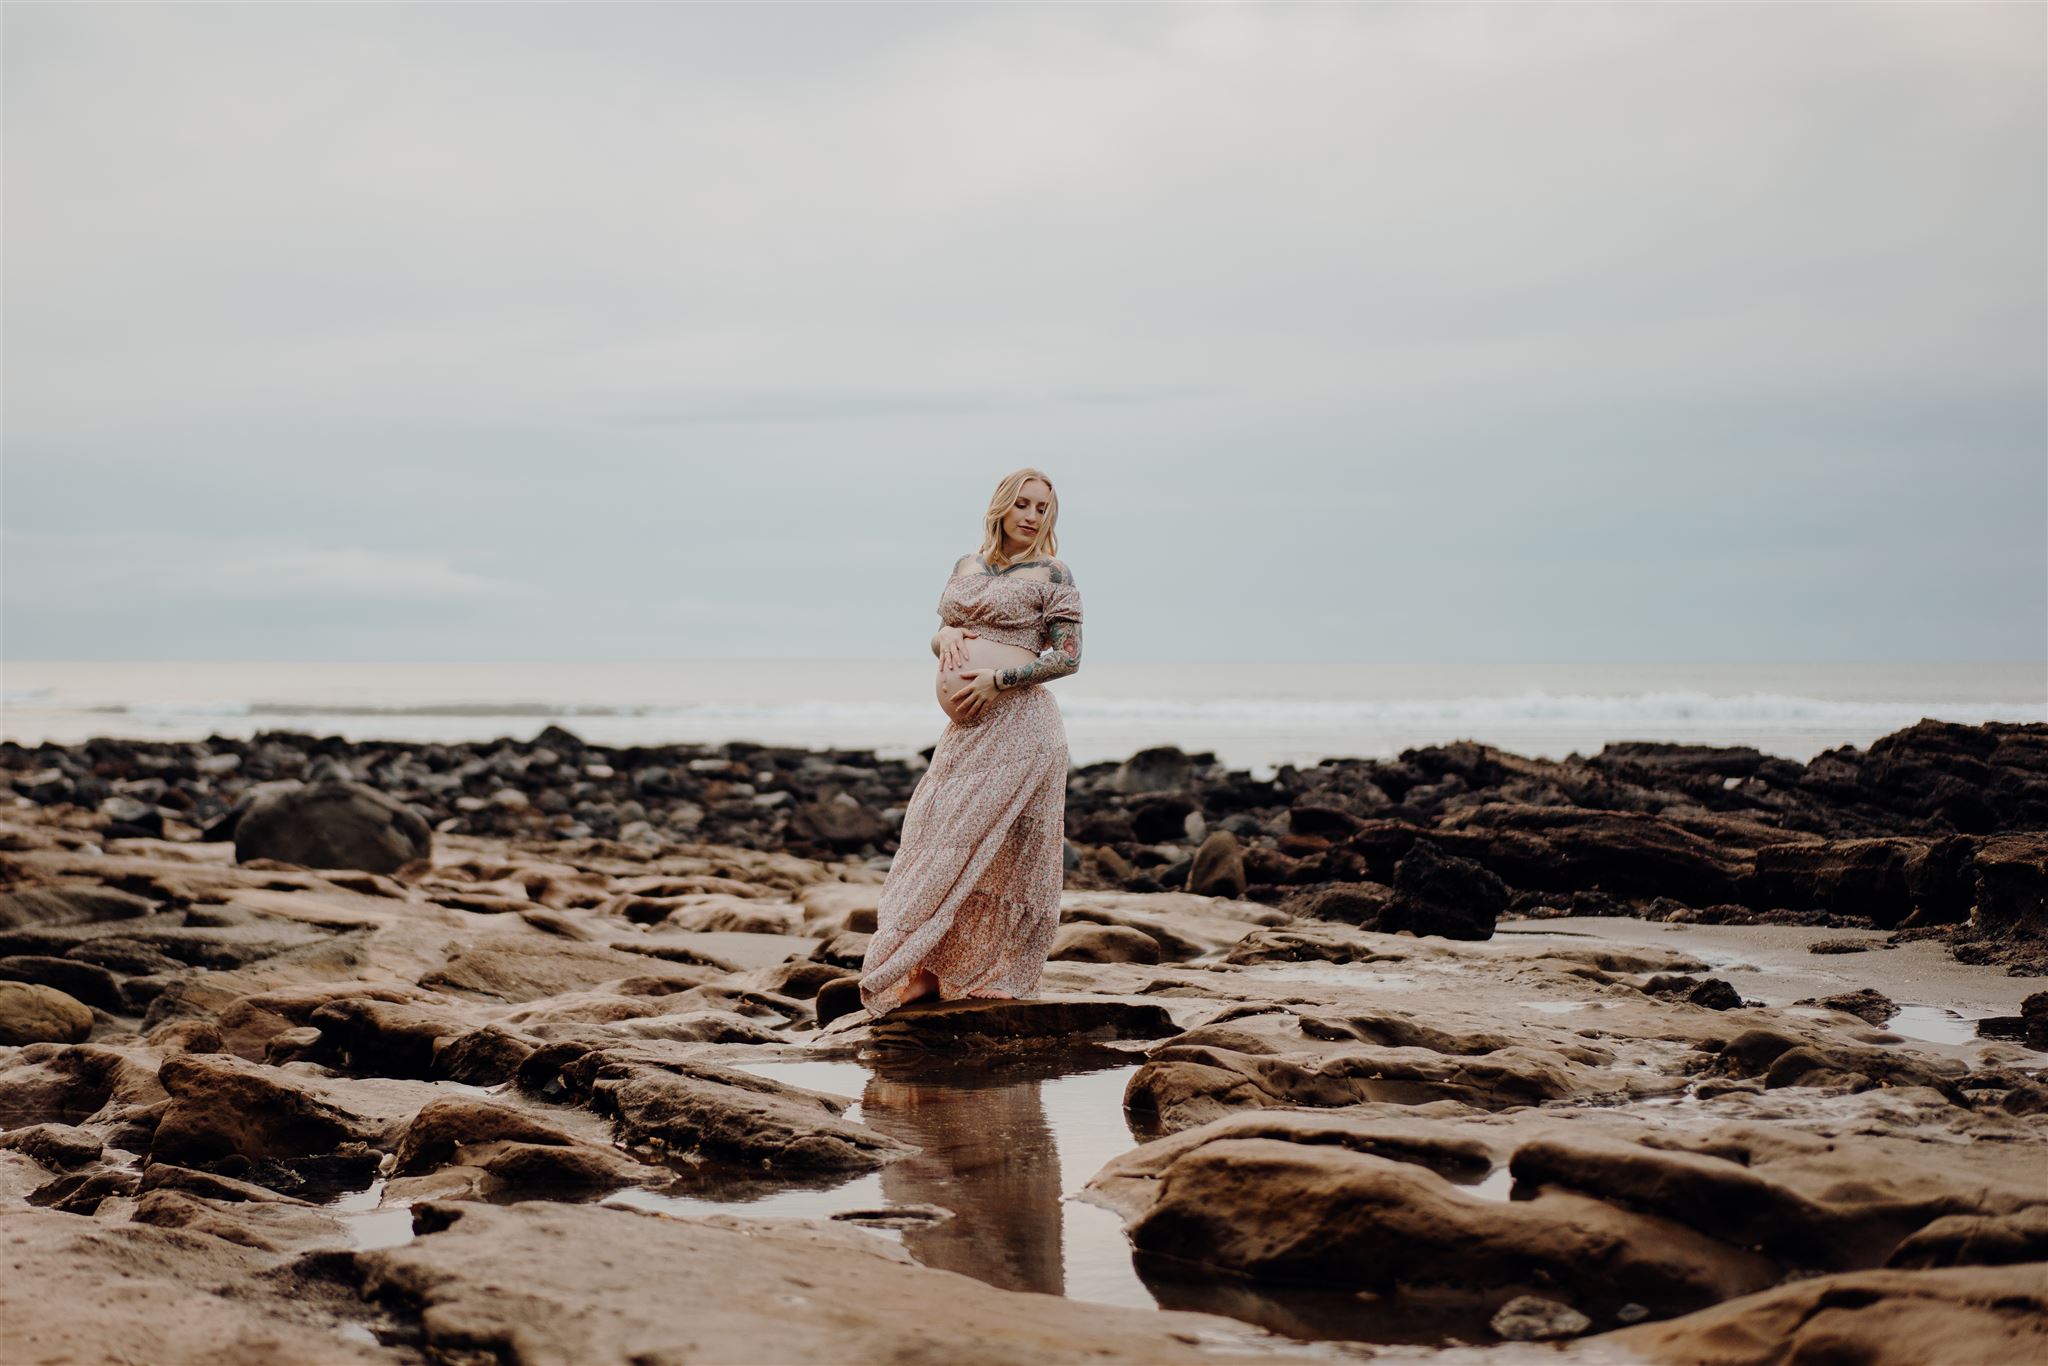 A woman wearing a maternity dress standing on the rocks at Ngarunui Beach in Raglan, Waikato being photographed by Haley Adele Photography